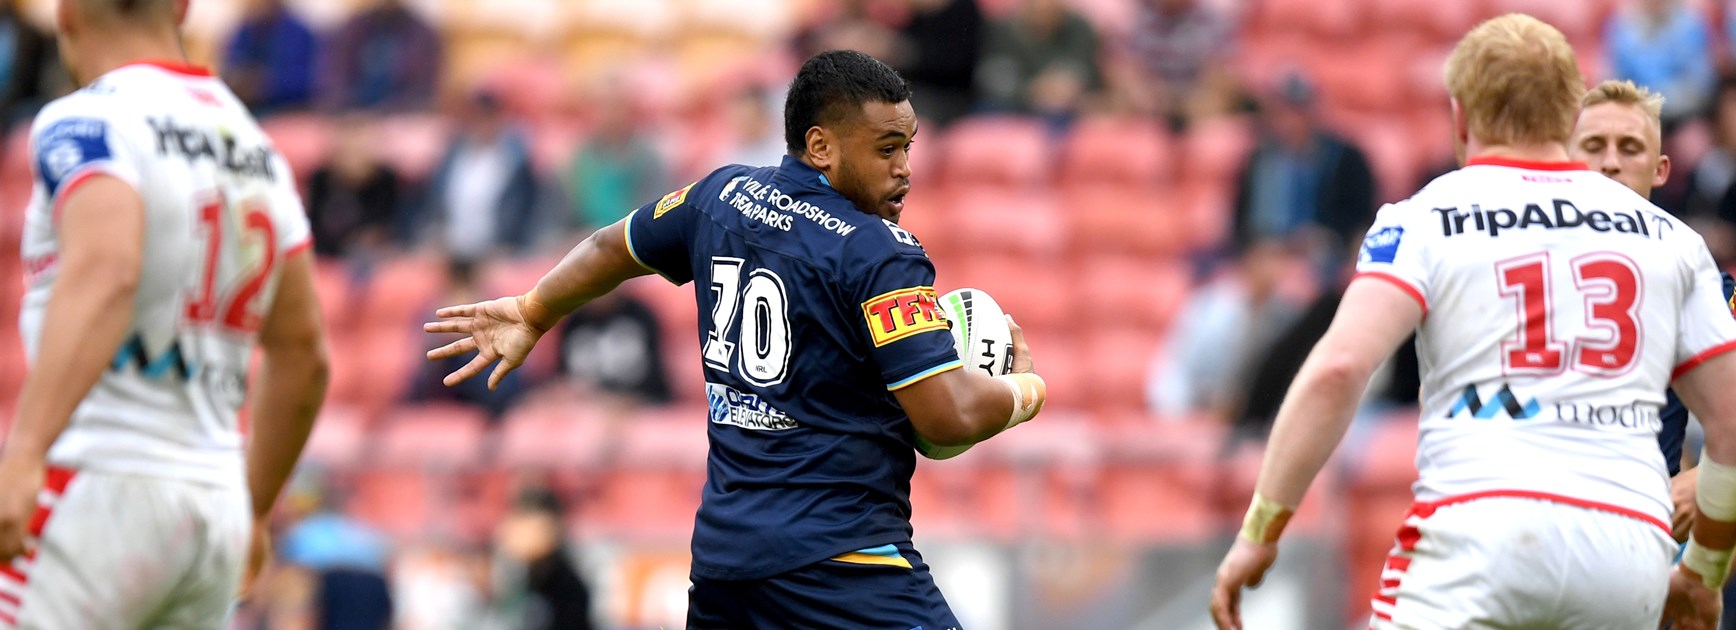 Under-sized Titans to chance their arm against big brother Broncos: Lisone